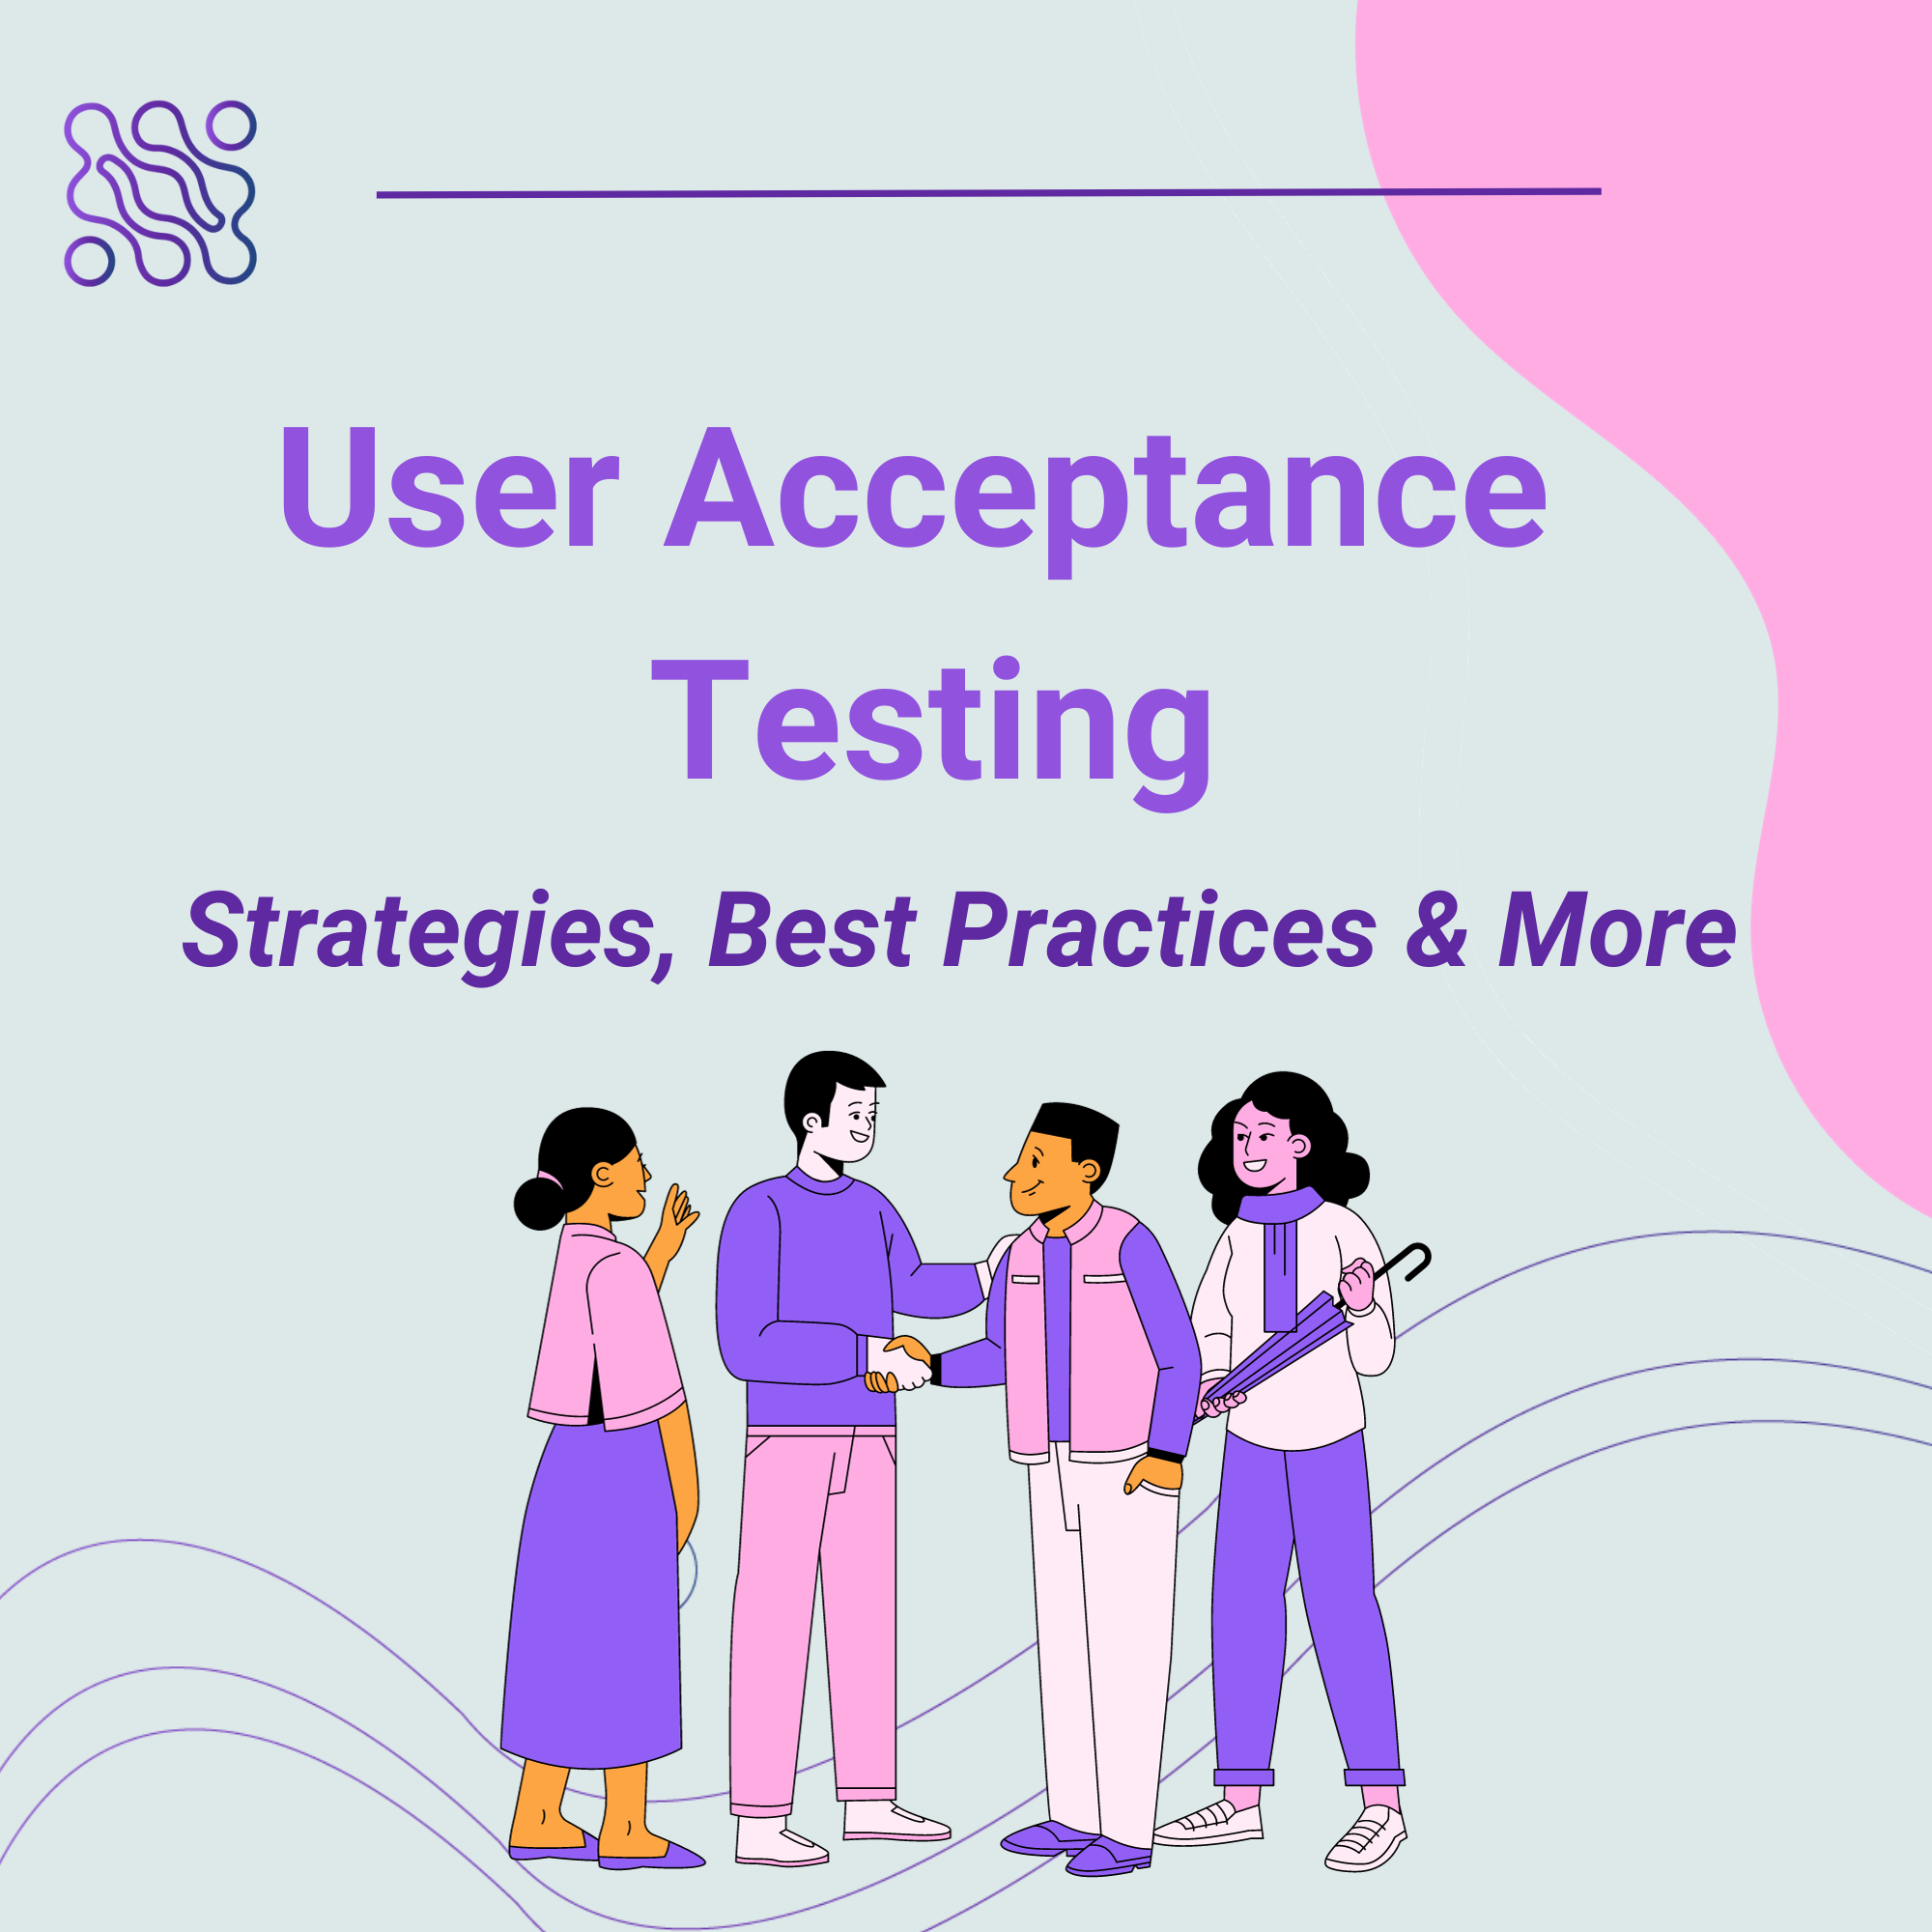 User Acceptance Testing Strategies Best Practices and More in 5 Steps